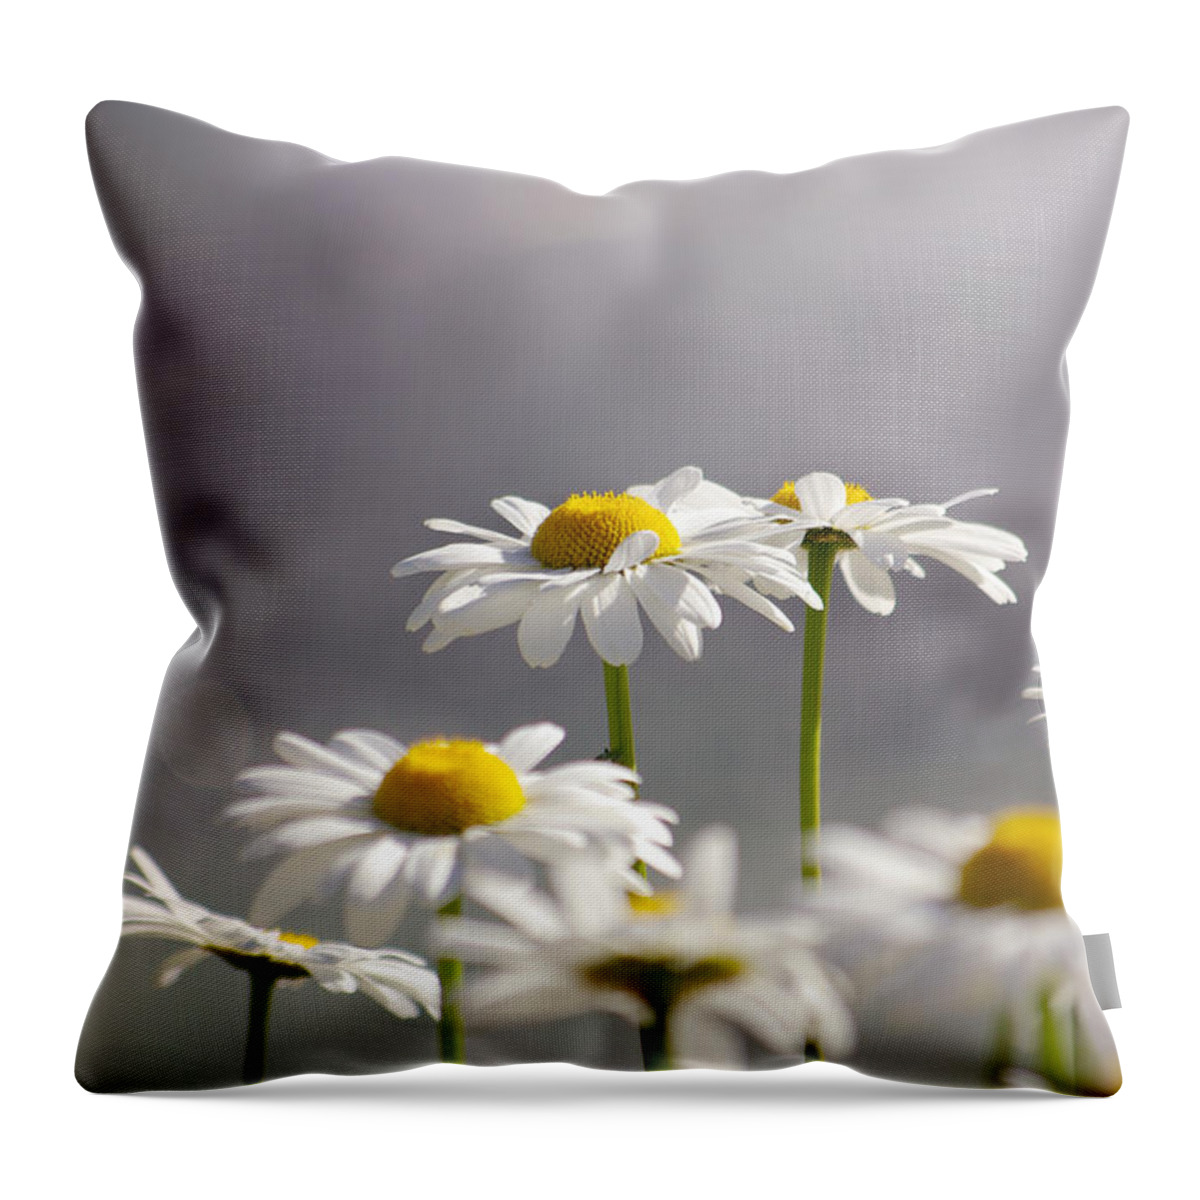 Agriculture Throw Pillow featuring the photograph White Daisies #1 by Carlos Caetano